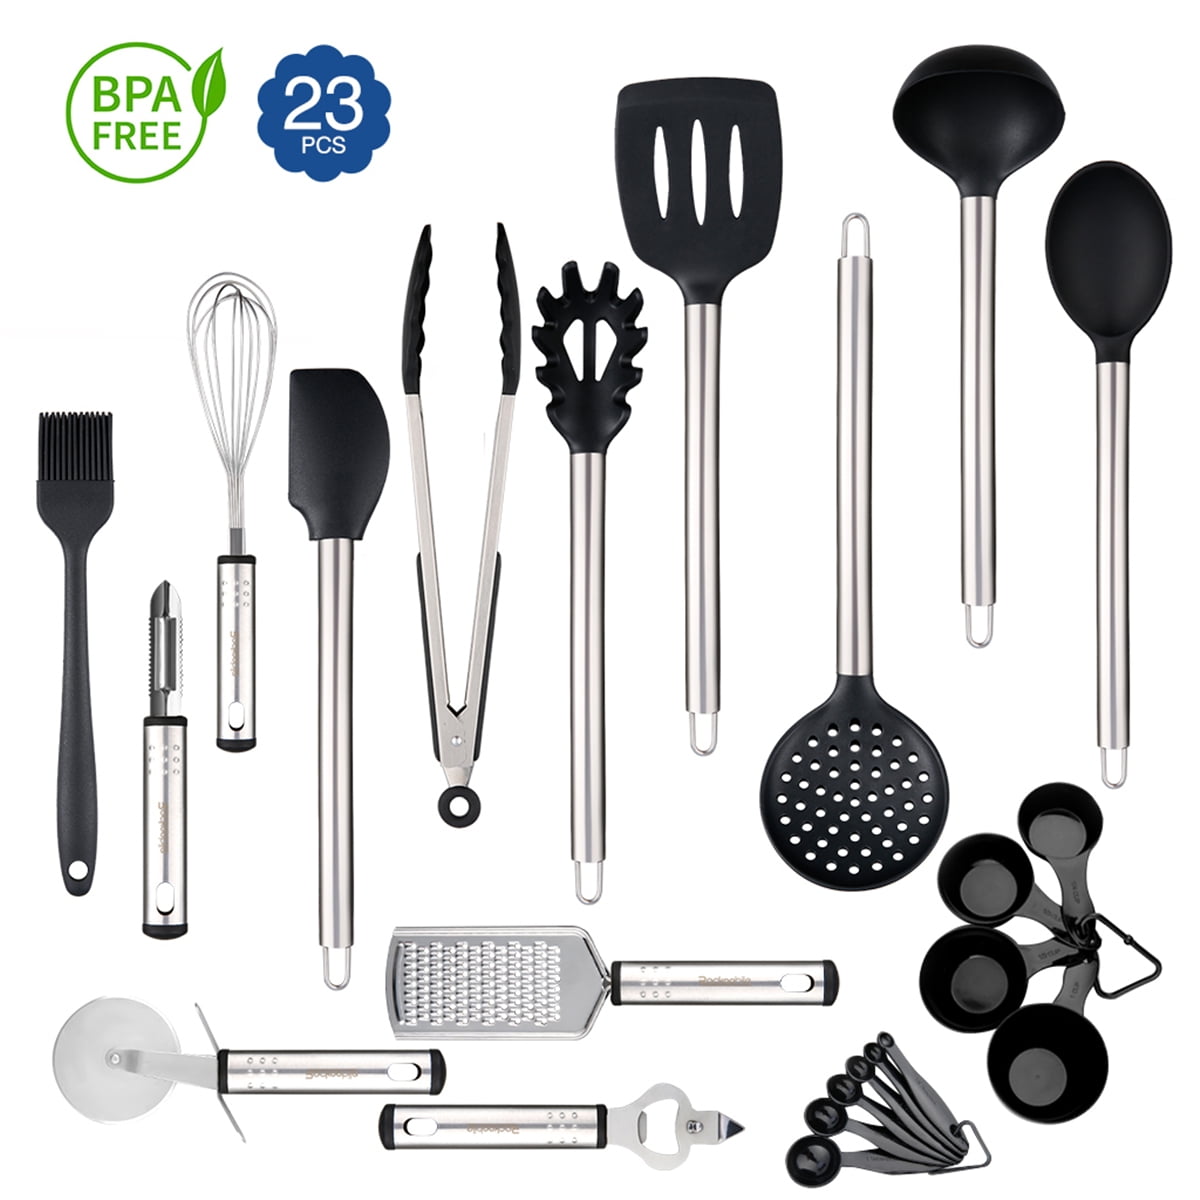 25Pcs Kitchen Utensil Sets Silicone Cooking Set Nonstick Cooking Supplies  Kitchen Accessories Gadget Tools Stainless Steel Non Stick Heat Resistant  ...